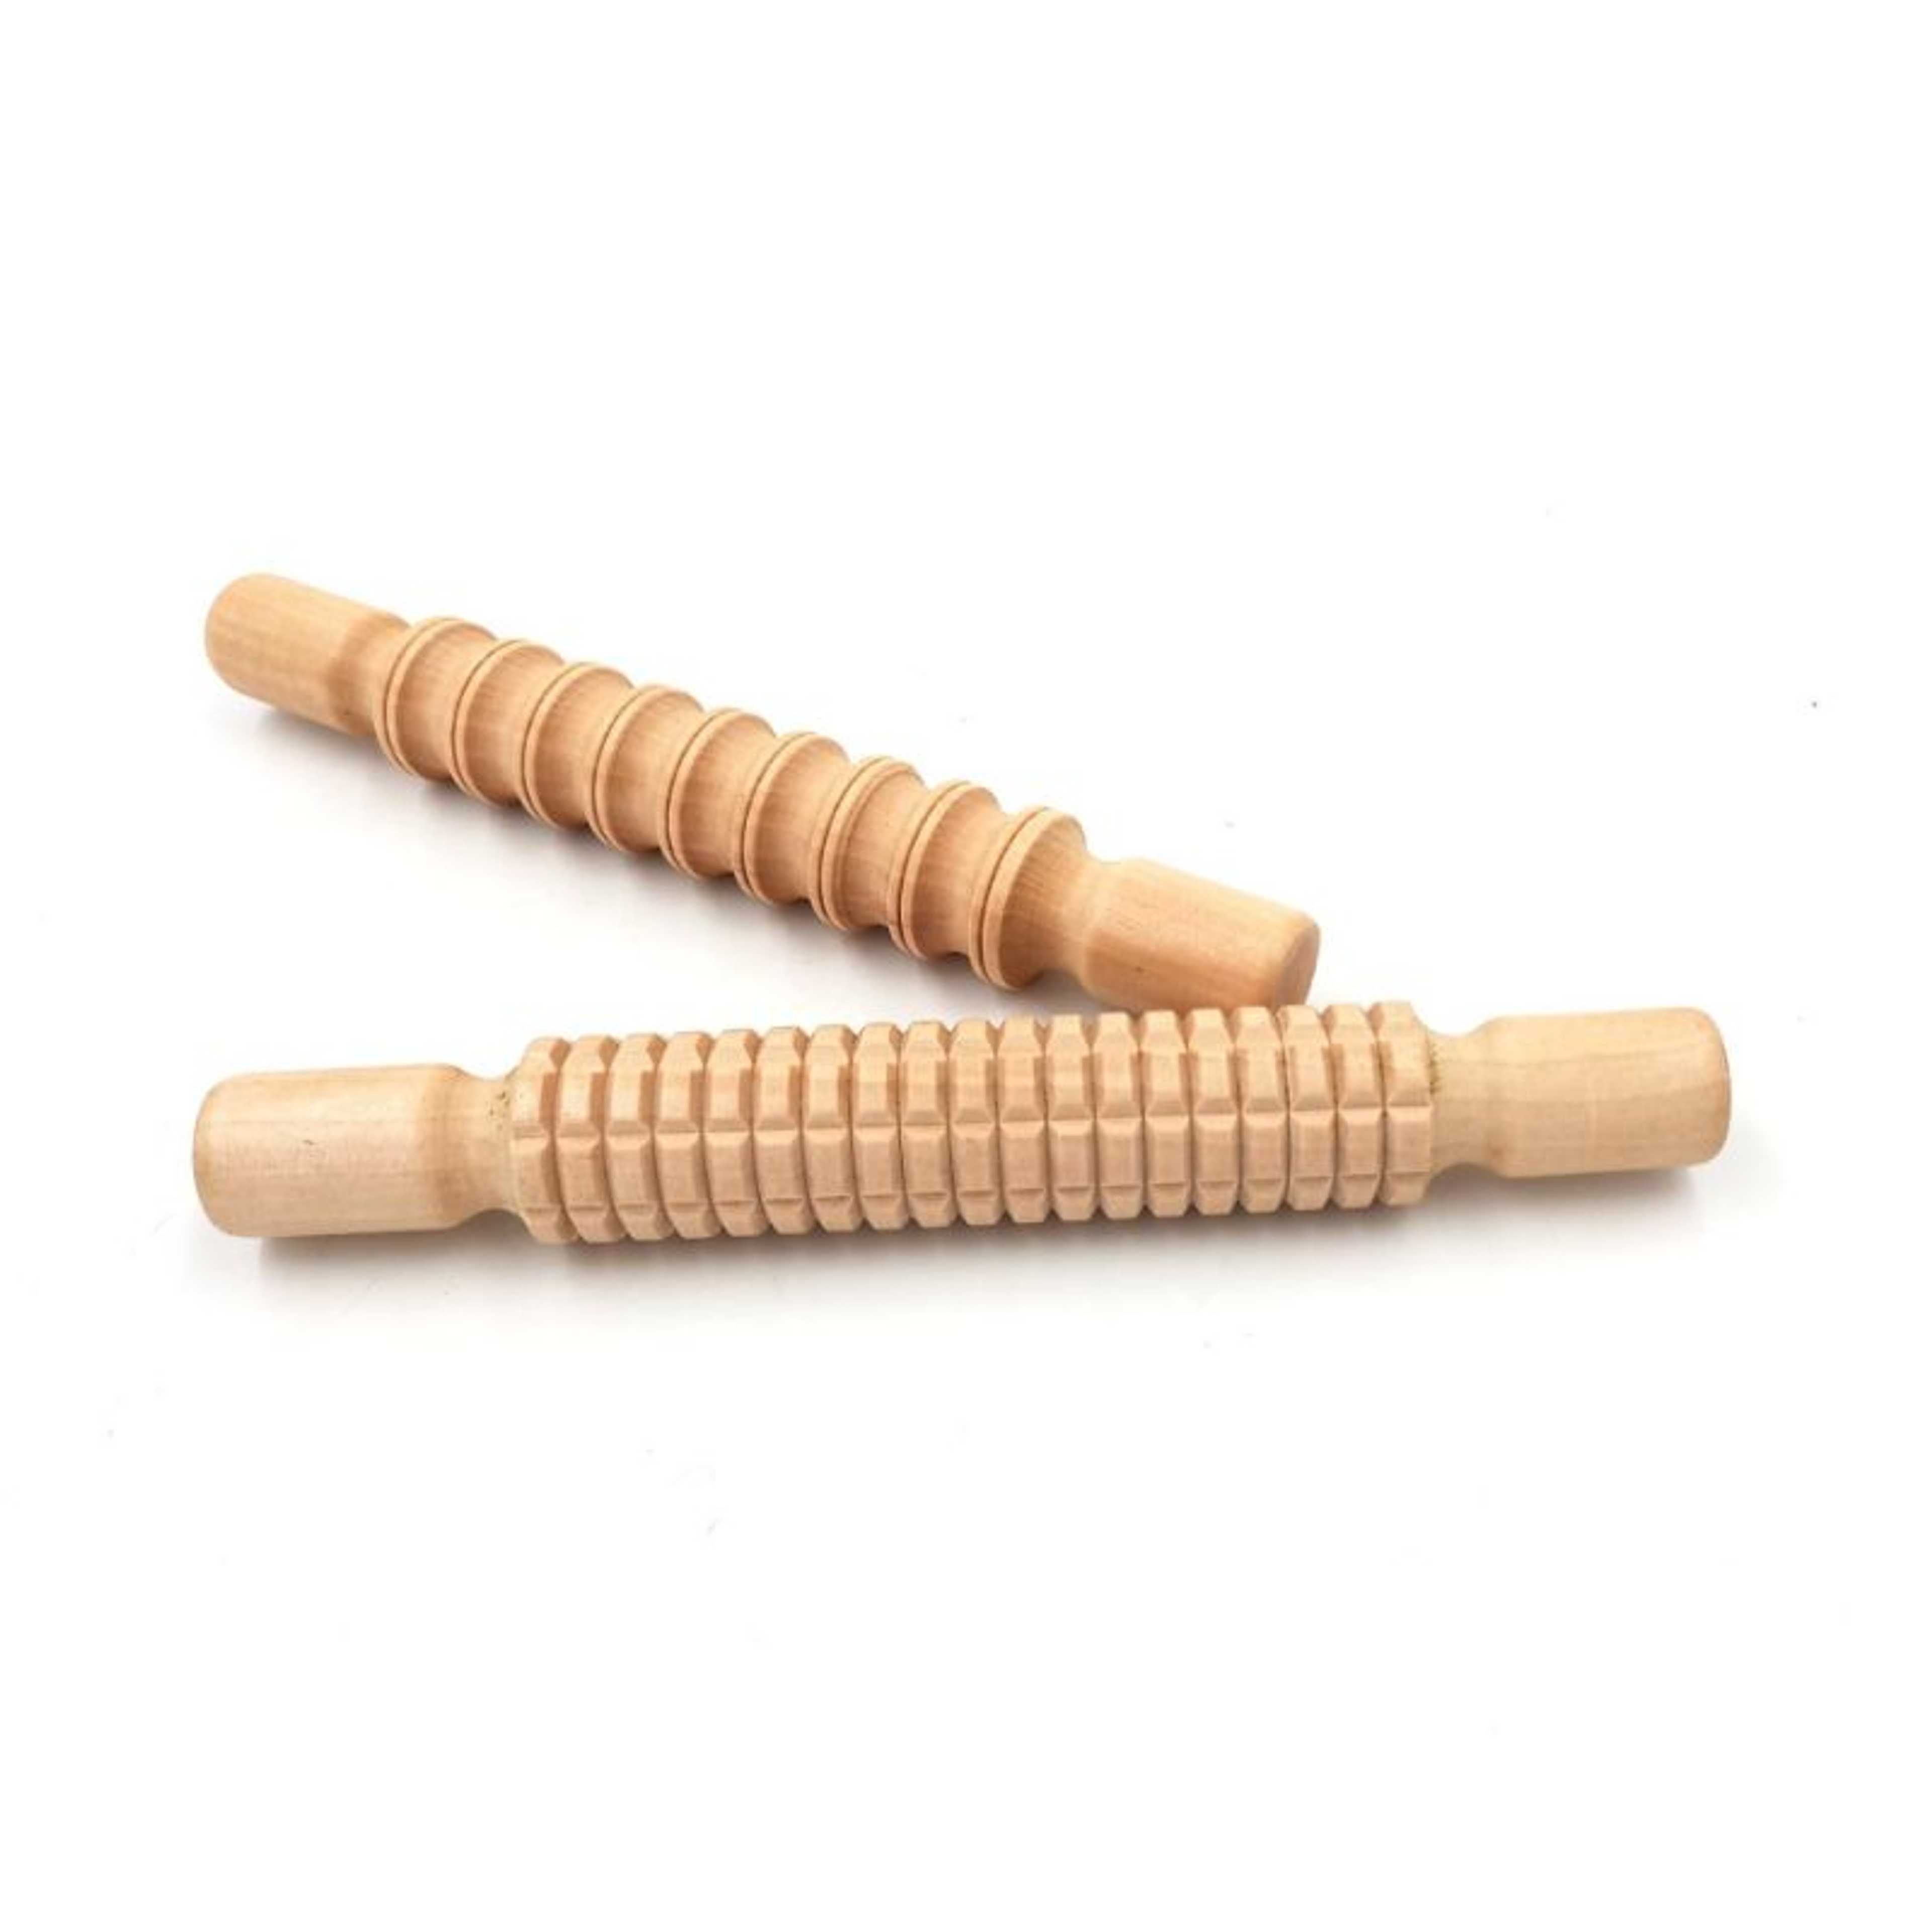 Assorted Design Textured Wooden Rolling Pins for Arts & Crafts(1 Piece)